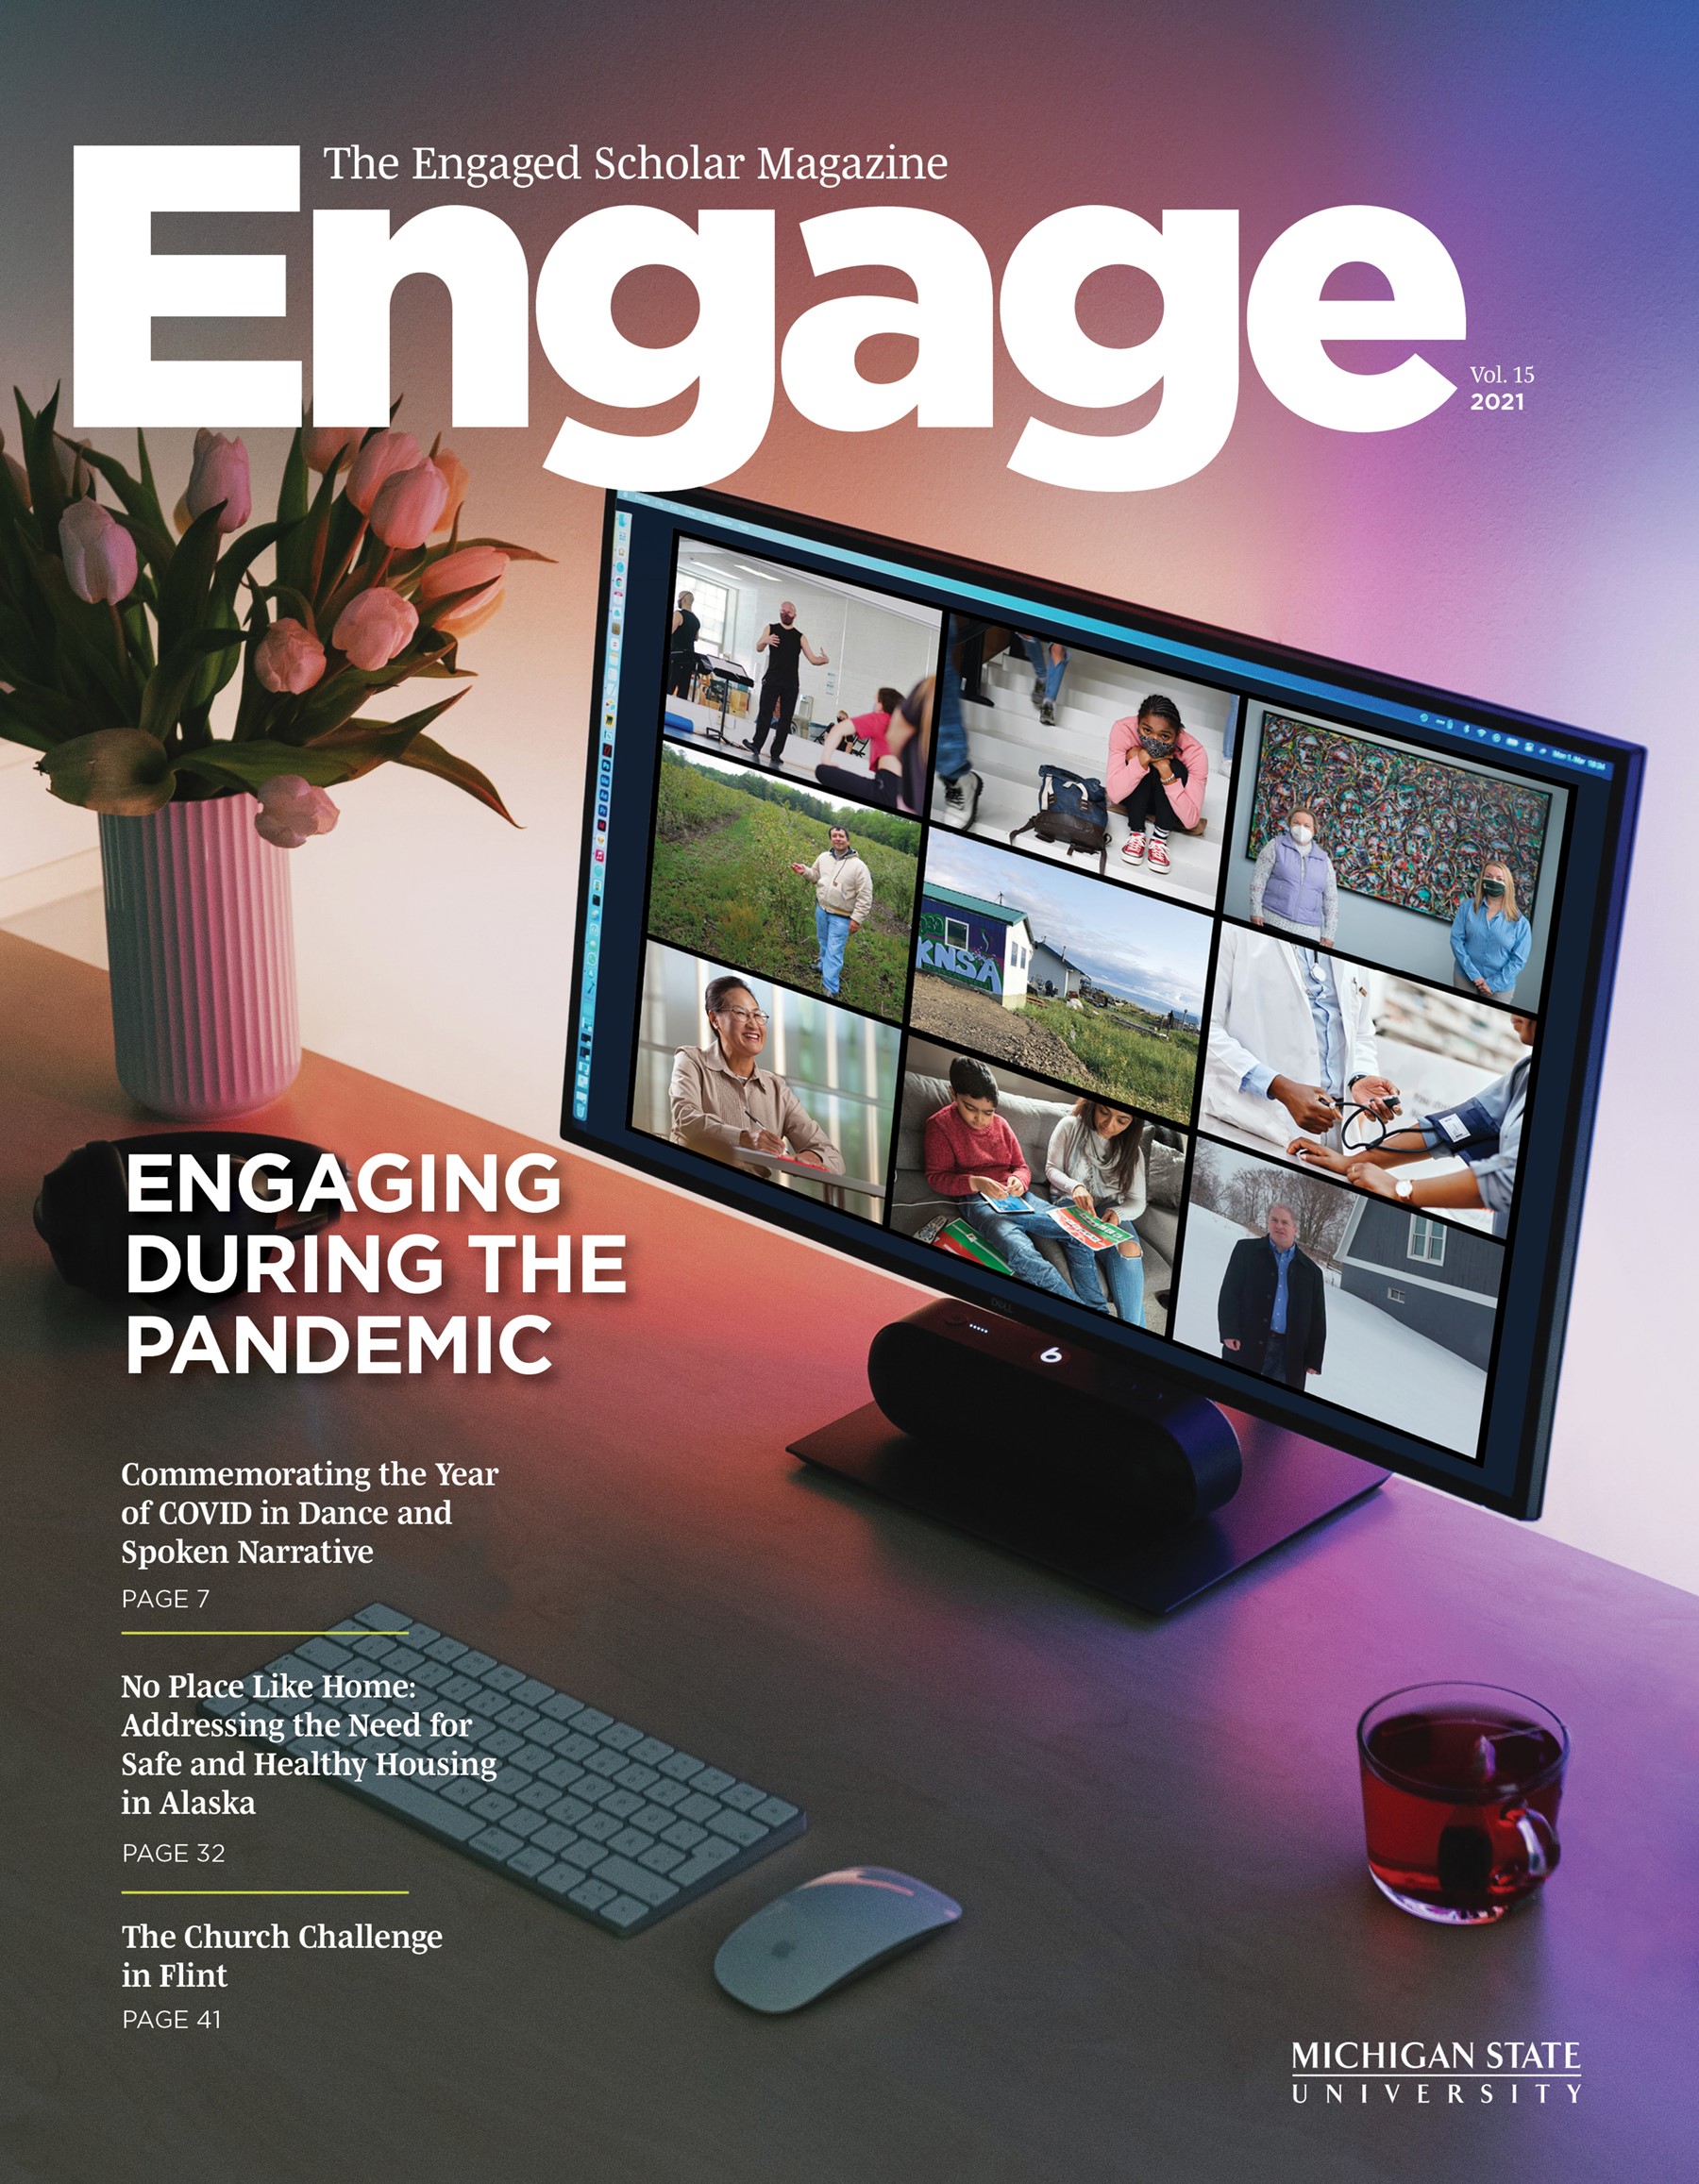 The Engaged Scholar Magazine Cover - Volume 15